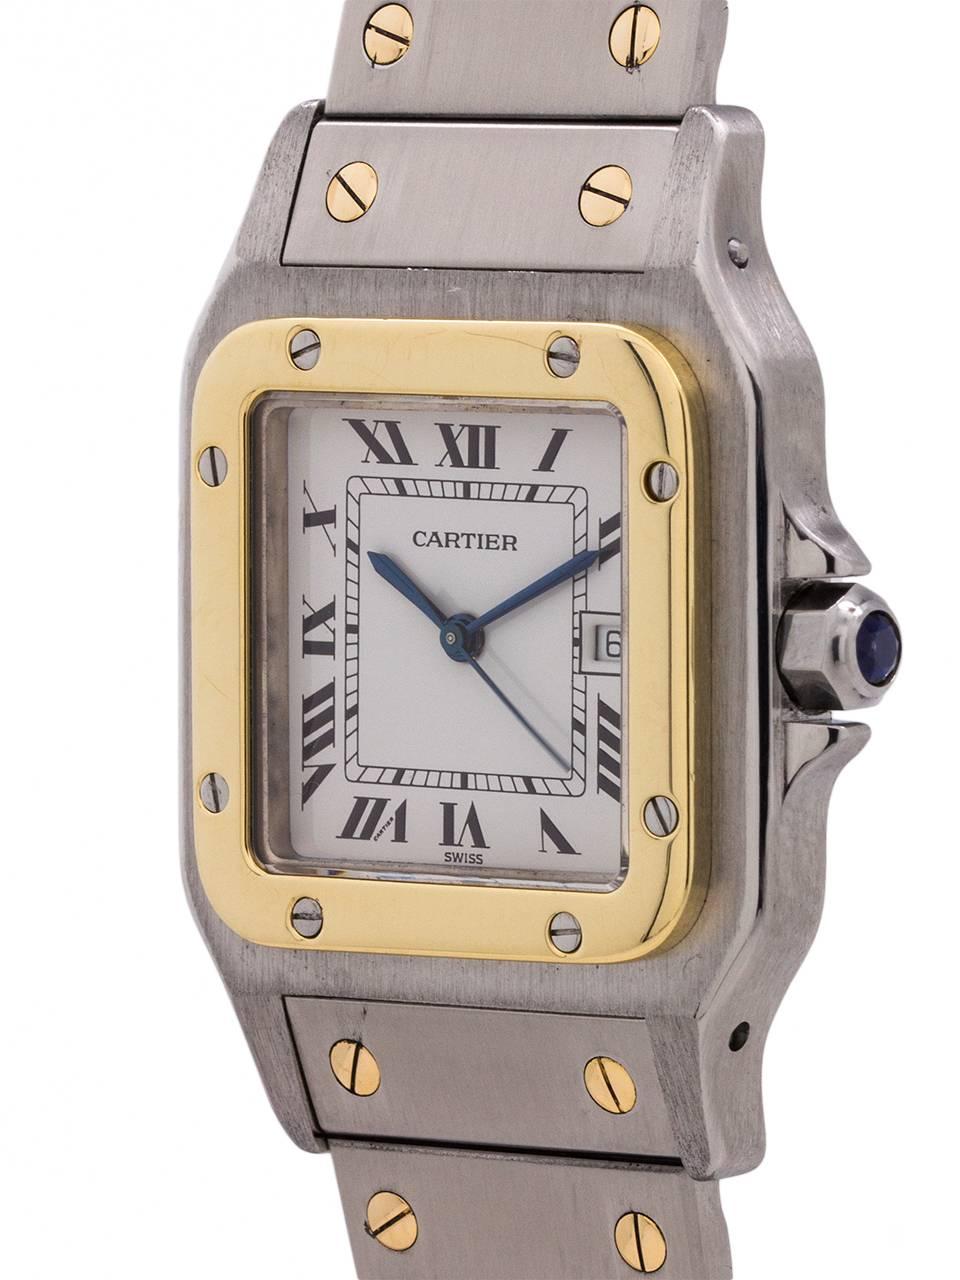 
Cartier Santos Galbee Stainless Steel and 18K Yellow Gold circa 2000s. 30mm diameter case with yellow gold screwed in bezel and case back secured by 8 screws. Sapphire crystal and signature blue cabochon sapphire crown. Classic white dial with